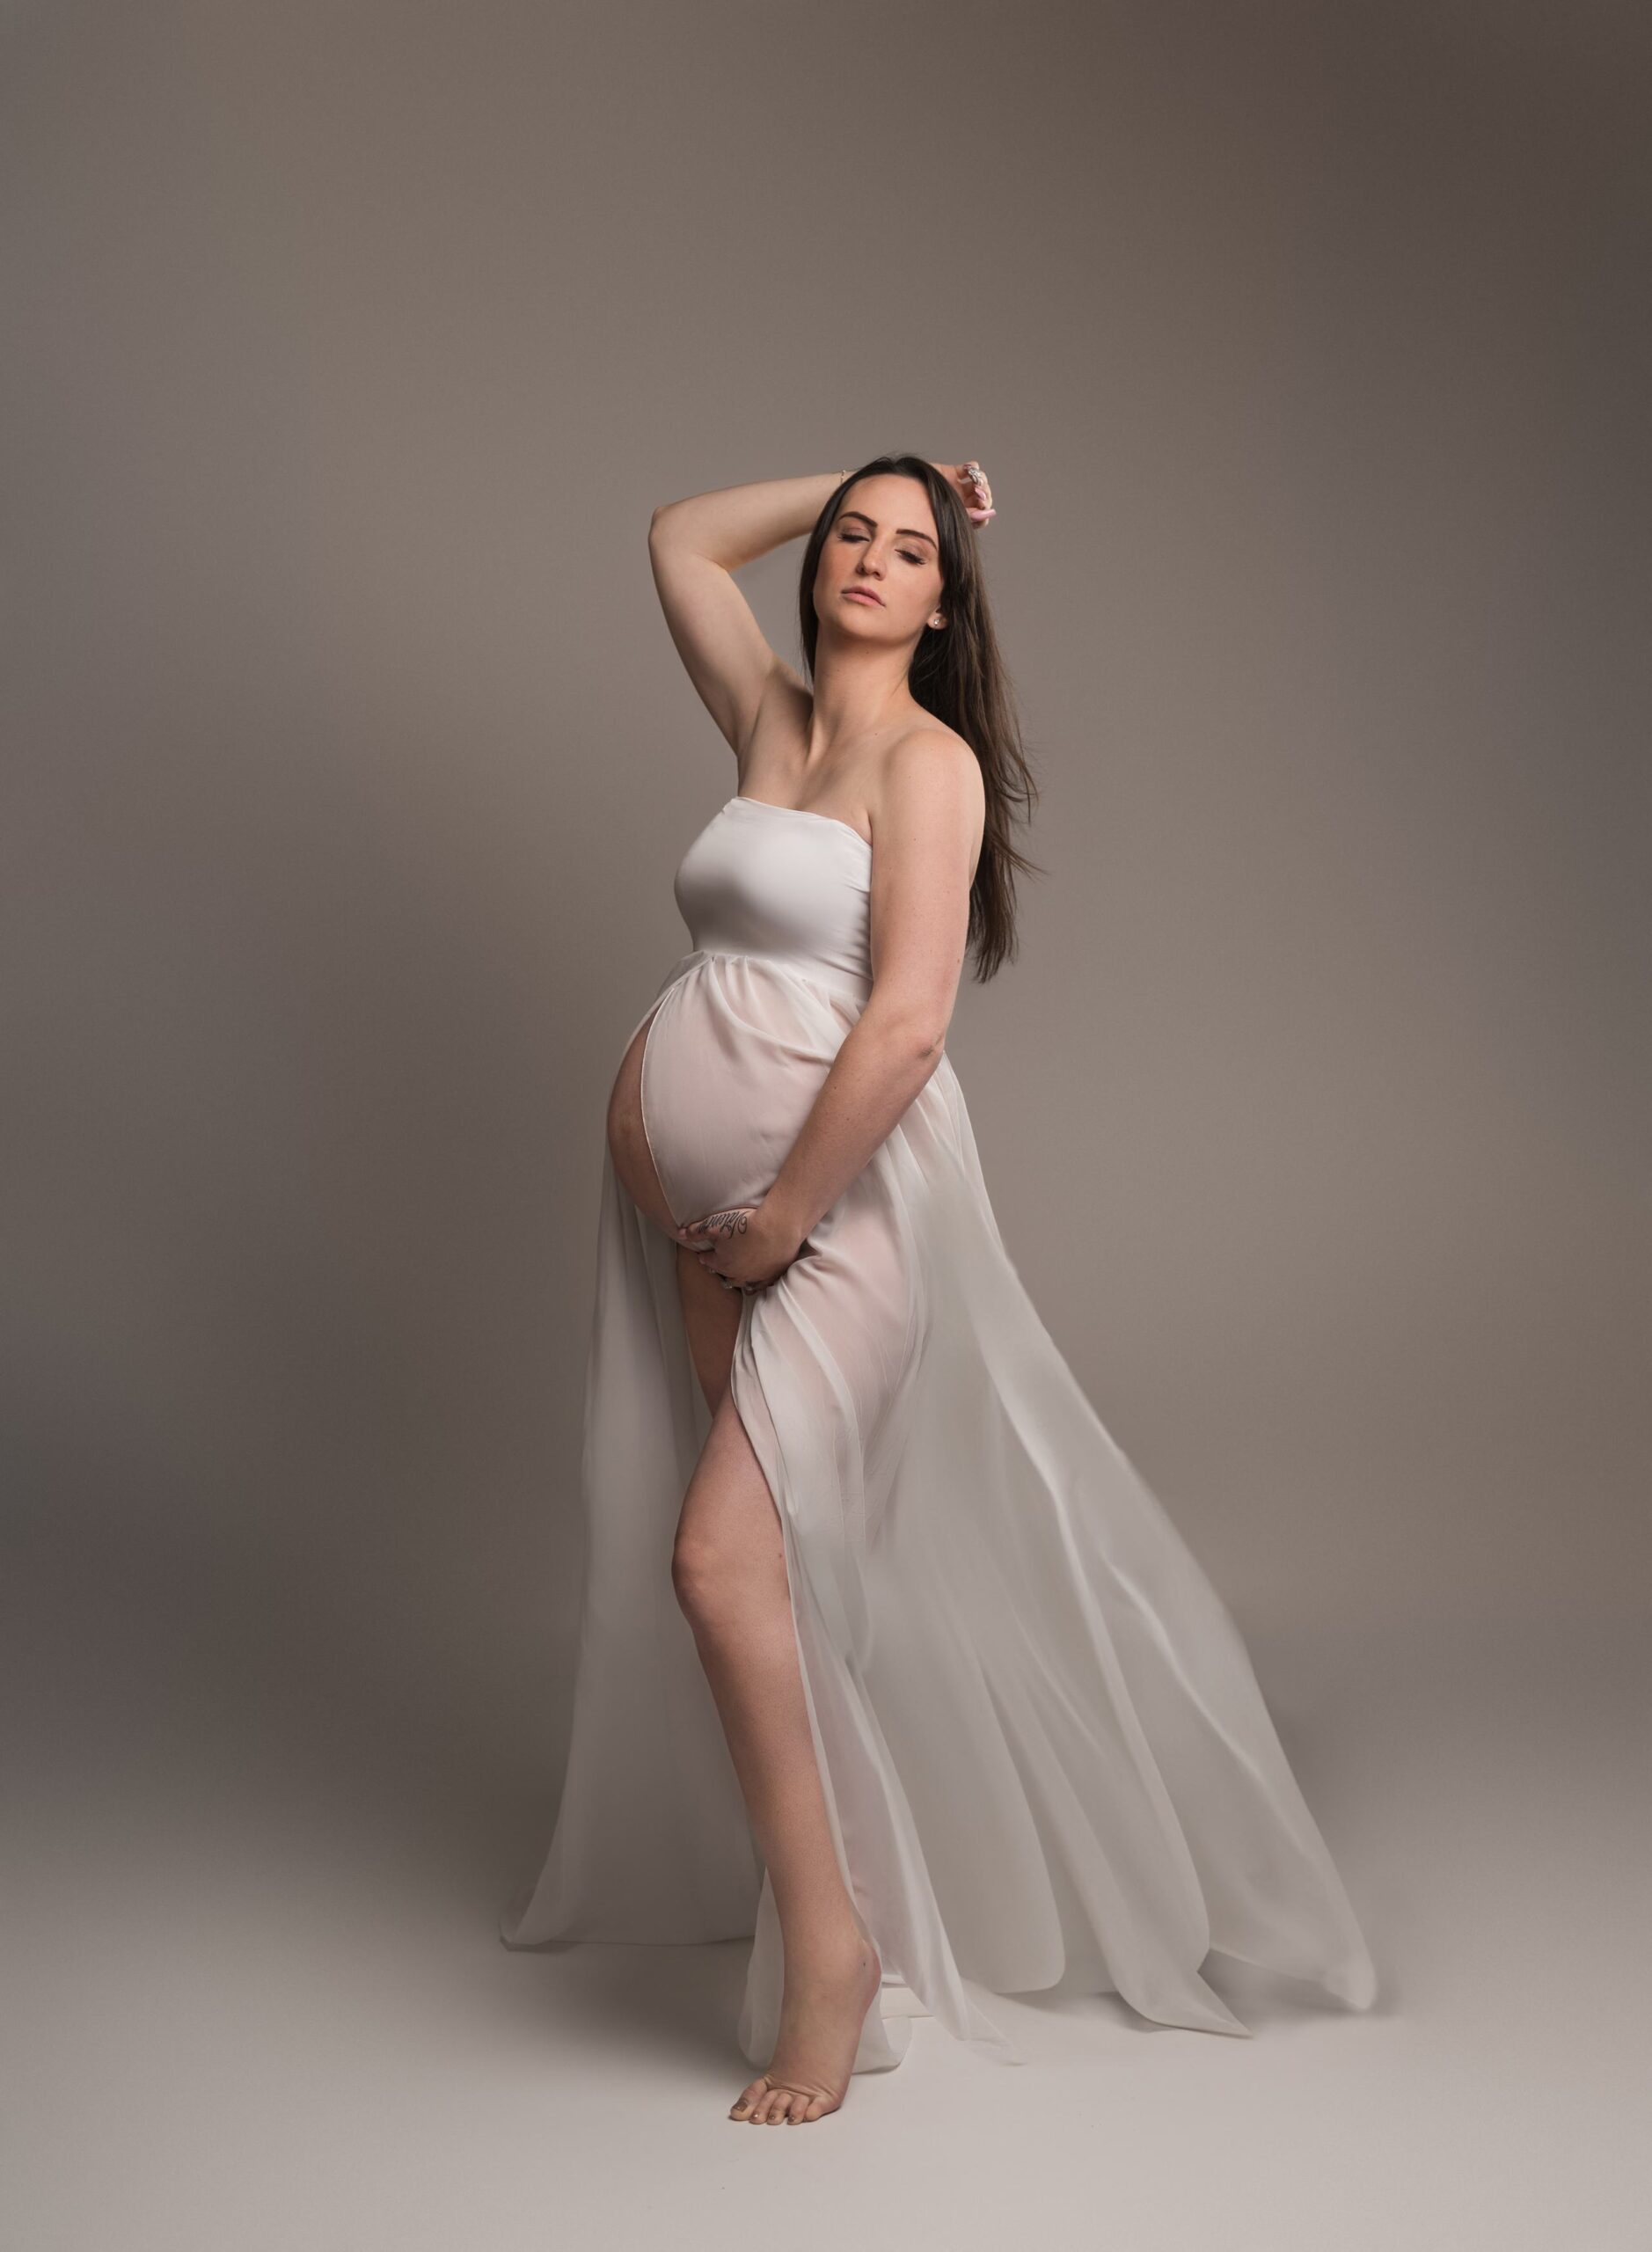 woman posing in a studio for a maternity portraits with her eyes closed wearing a long white gown